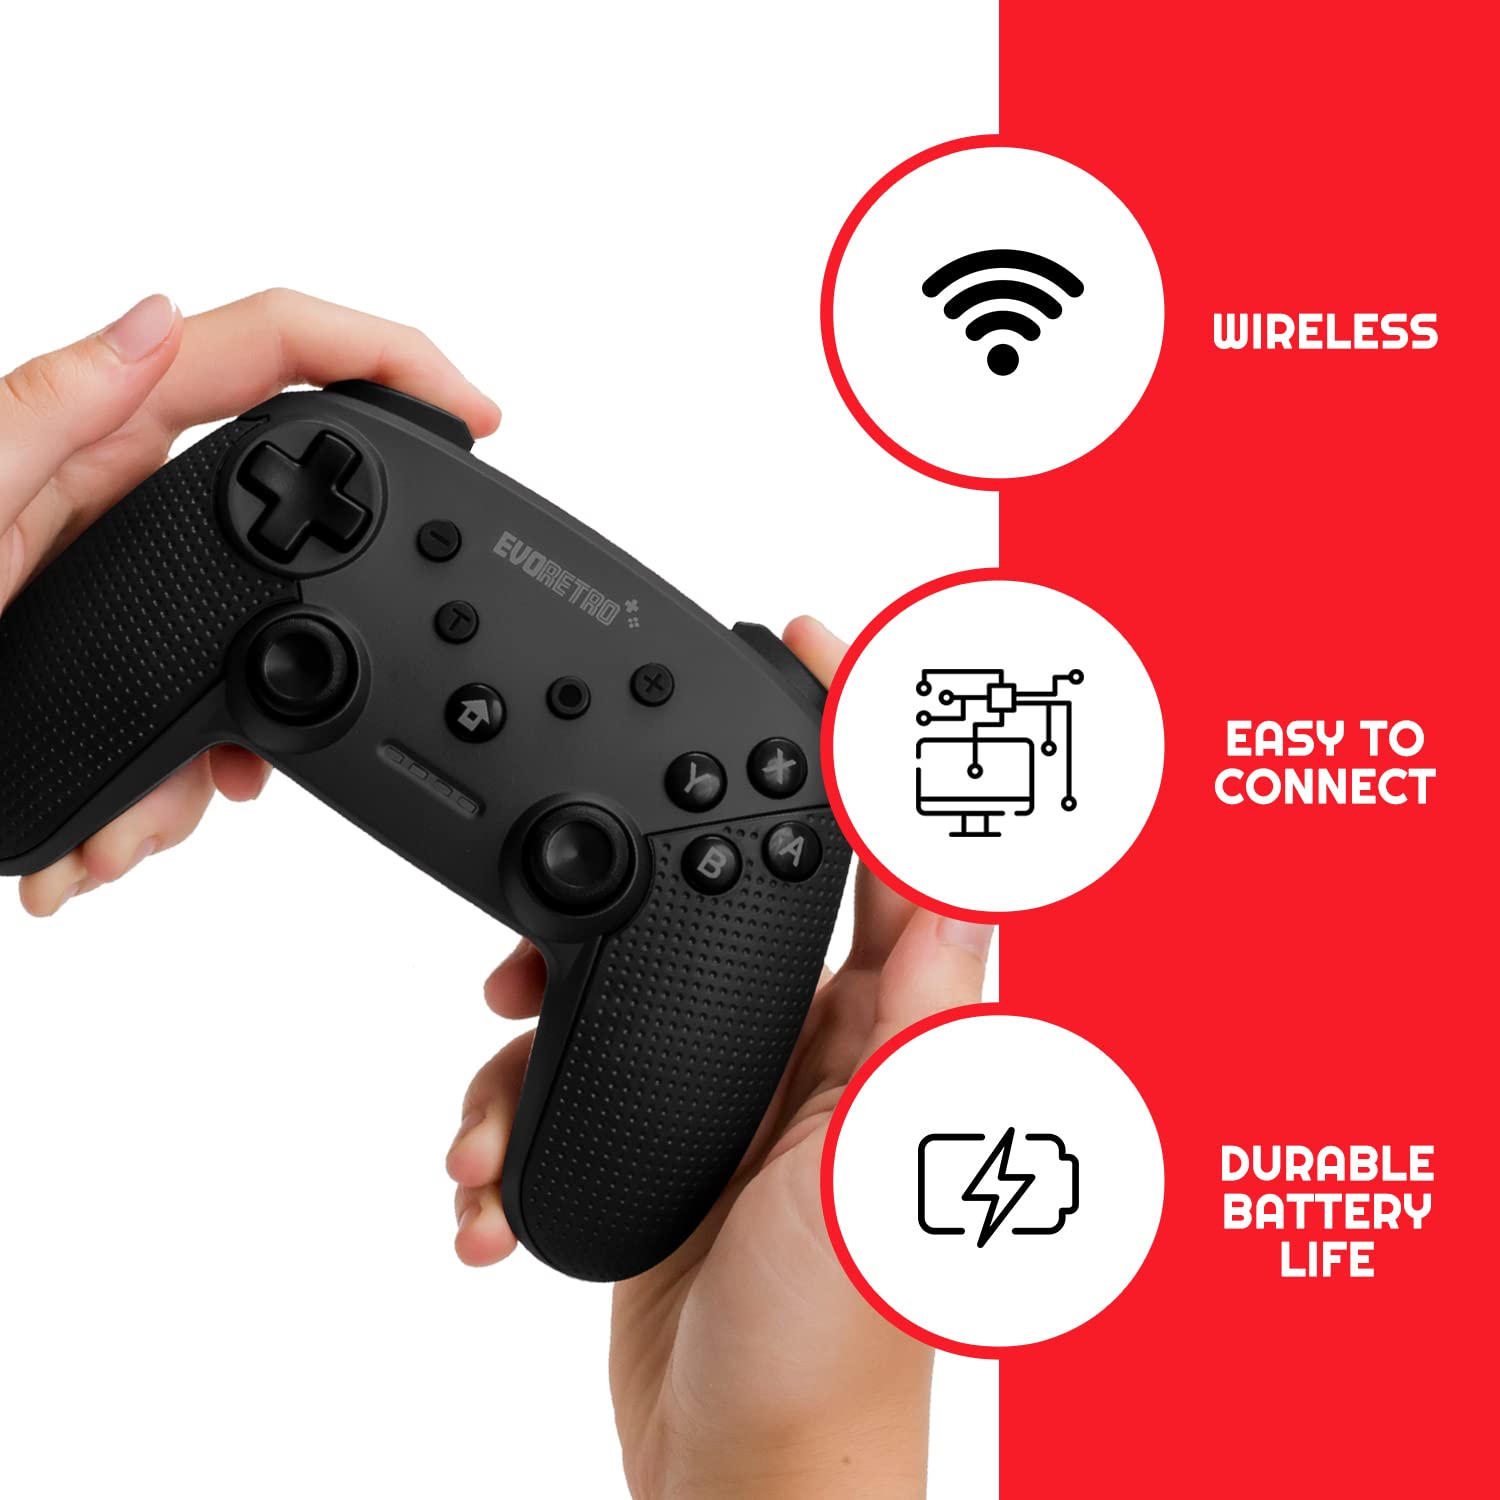 EVORETRO Switch Wireless Bluetooth Controller Compatible for Nintendo Switch Pro (Black) | PC Gamepad Joypad Remote with Gyro Axis (Turbo Buttons)